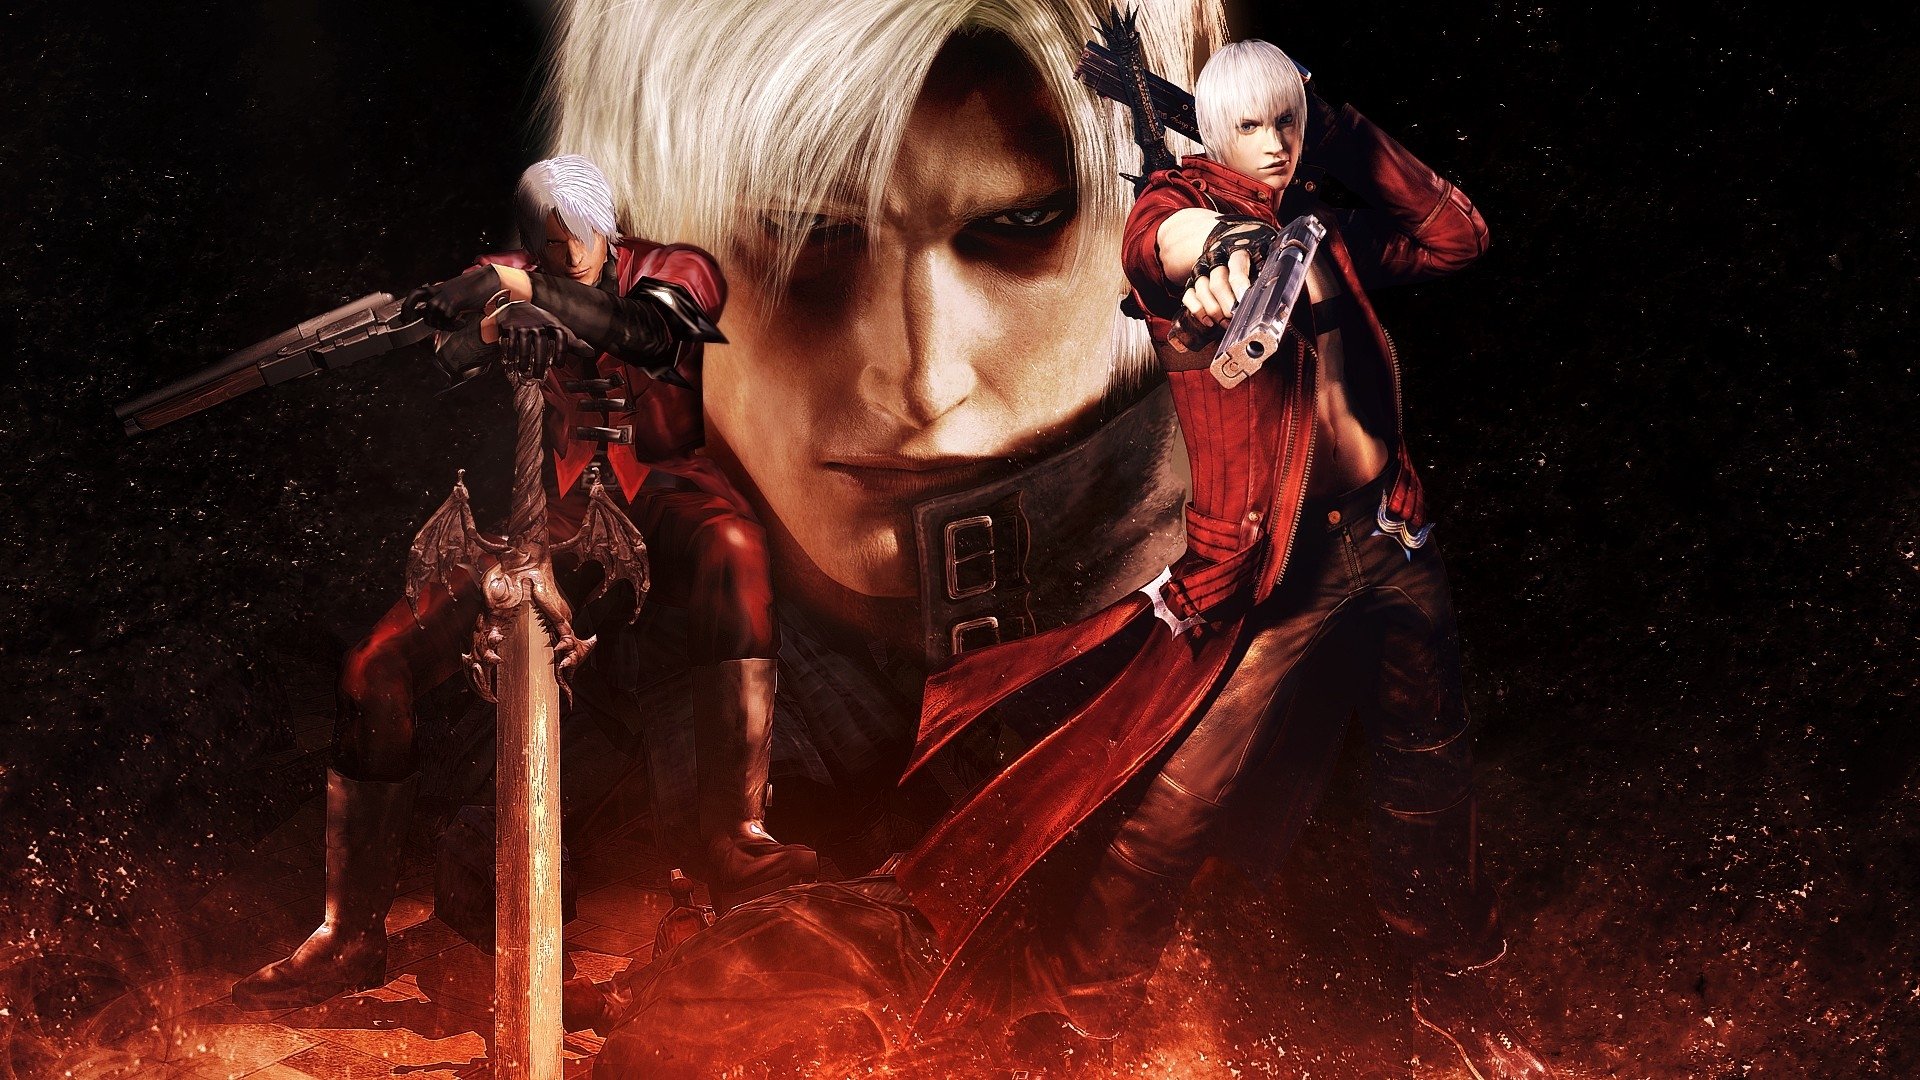 Devil May Cry 2 - Dante (game) (XP) : themeworld : Free Download, Borrow,  and Streaming : Internet Archive